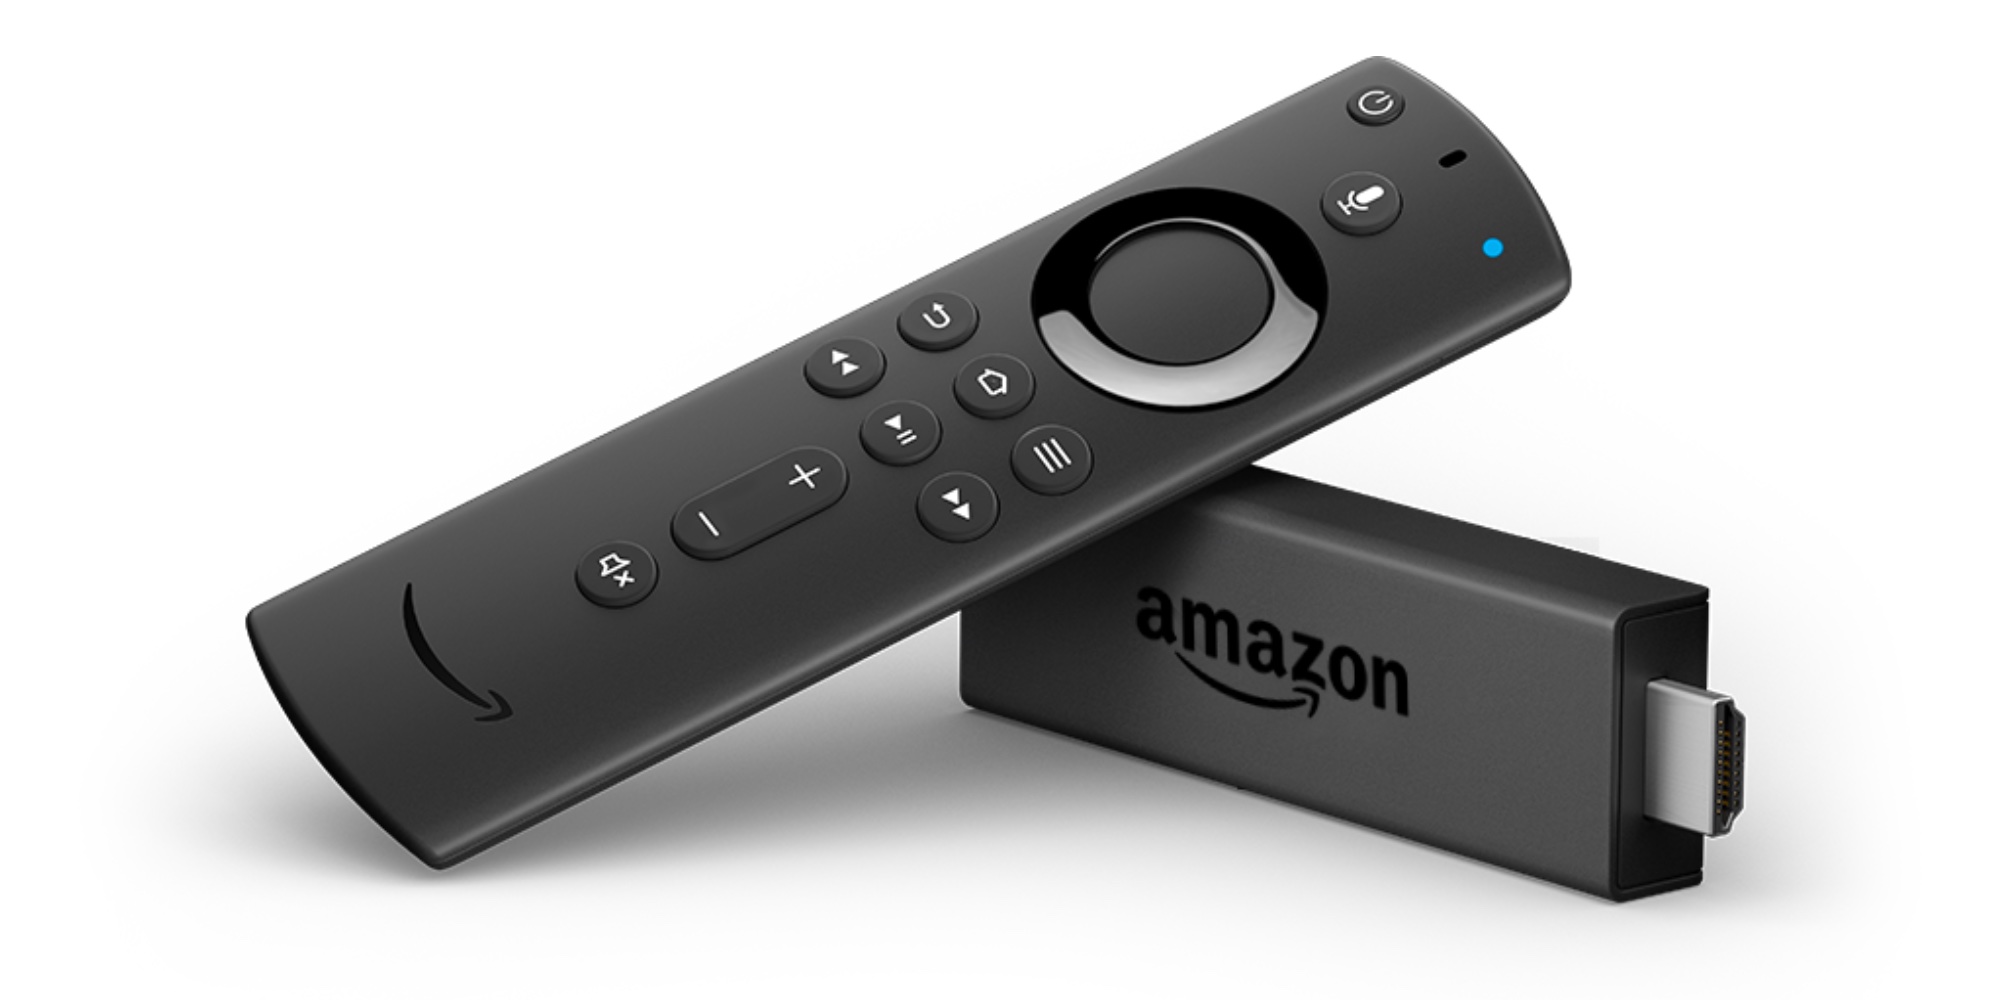 The best Android TV box to buy: Amazon Fire TV Stick ( [year]): Flexible, stable and readily available